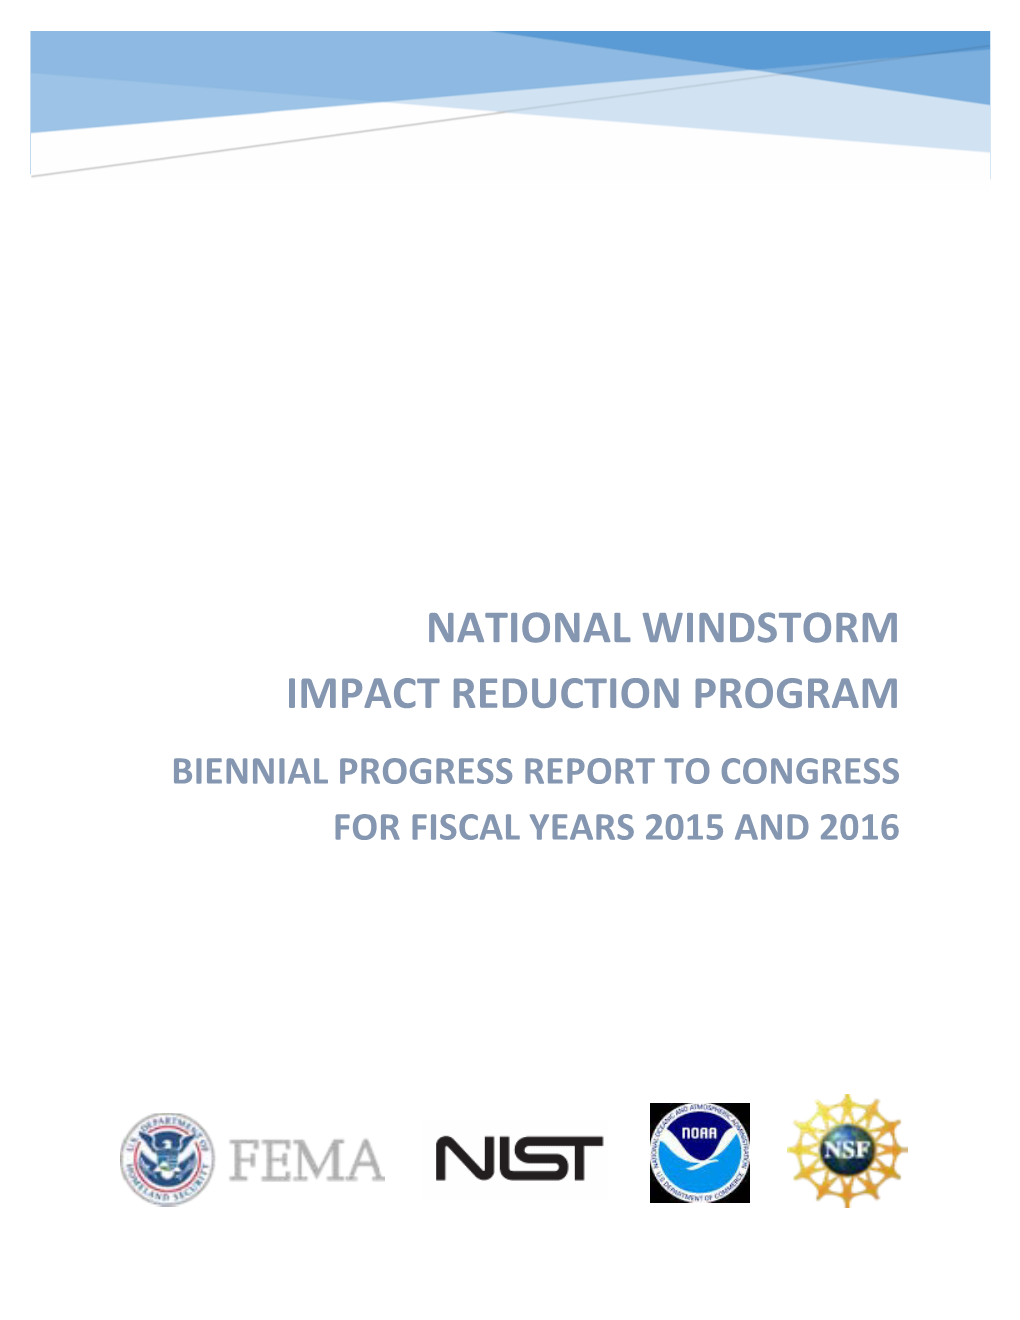 National Windstorm Impact Reduction Program Biennial Progress Report to Congress for Fiscal Years 2015 and 2016